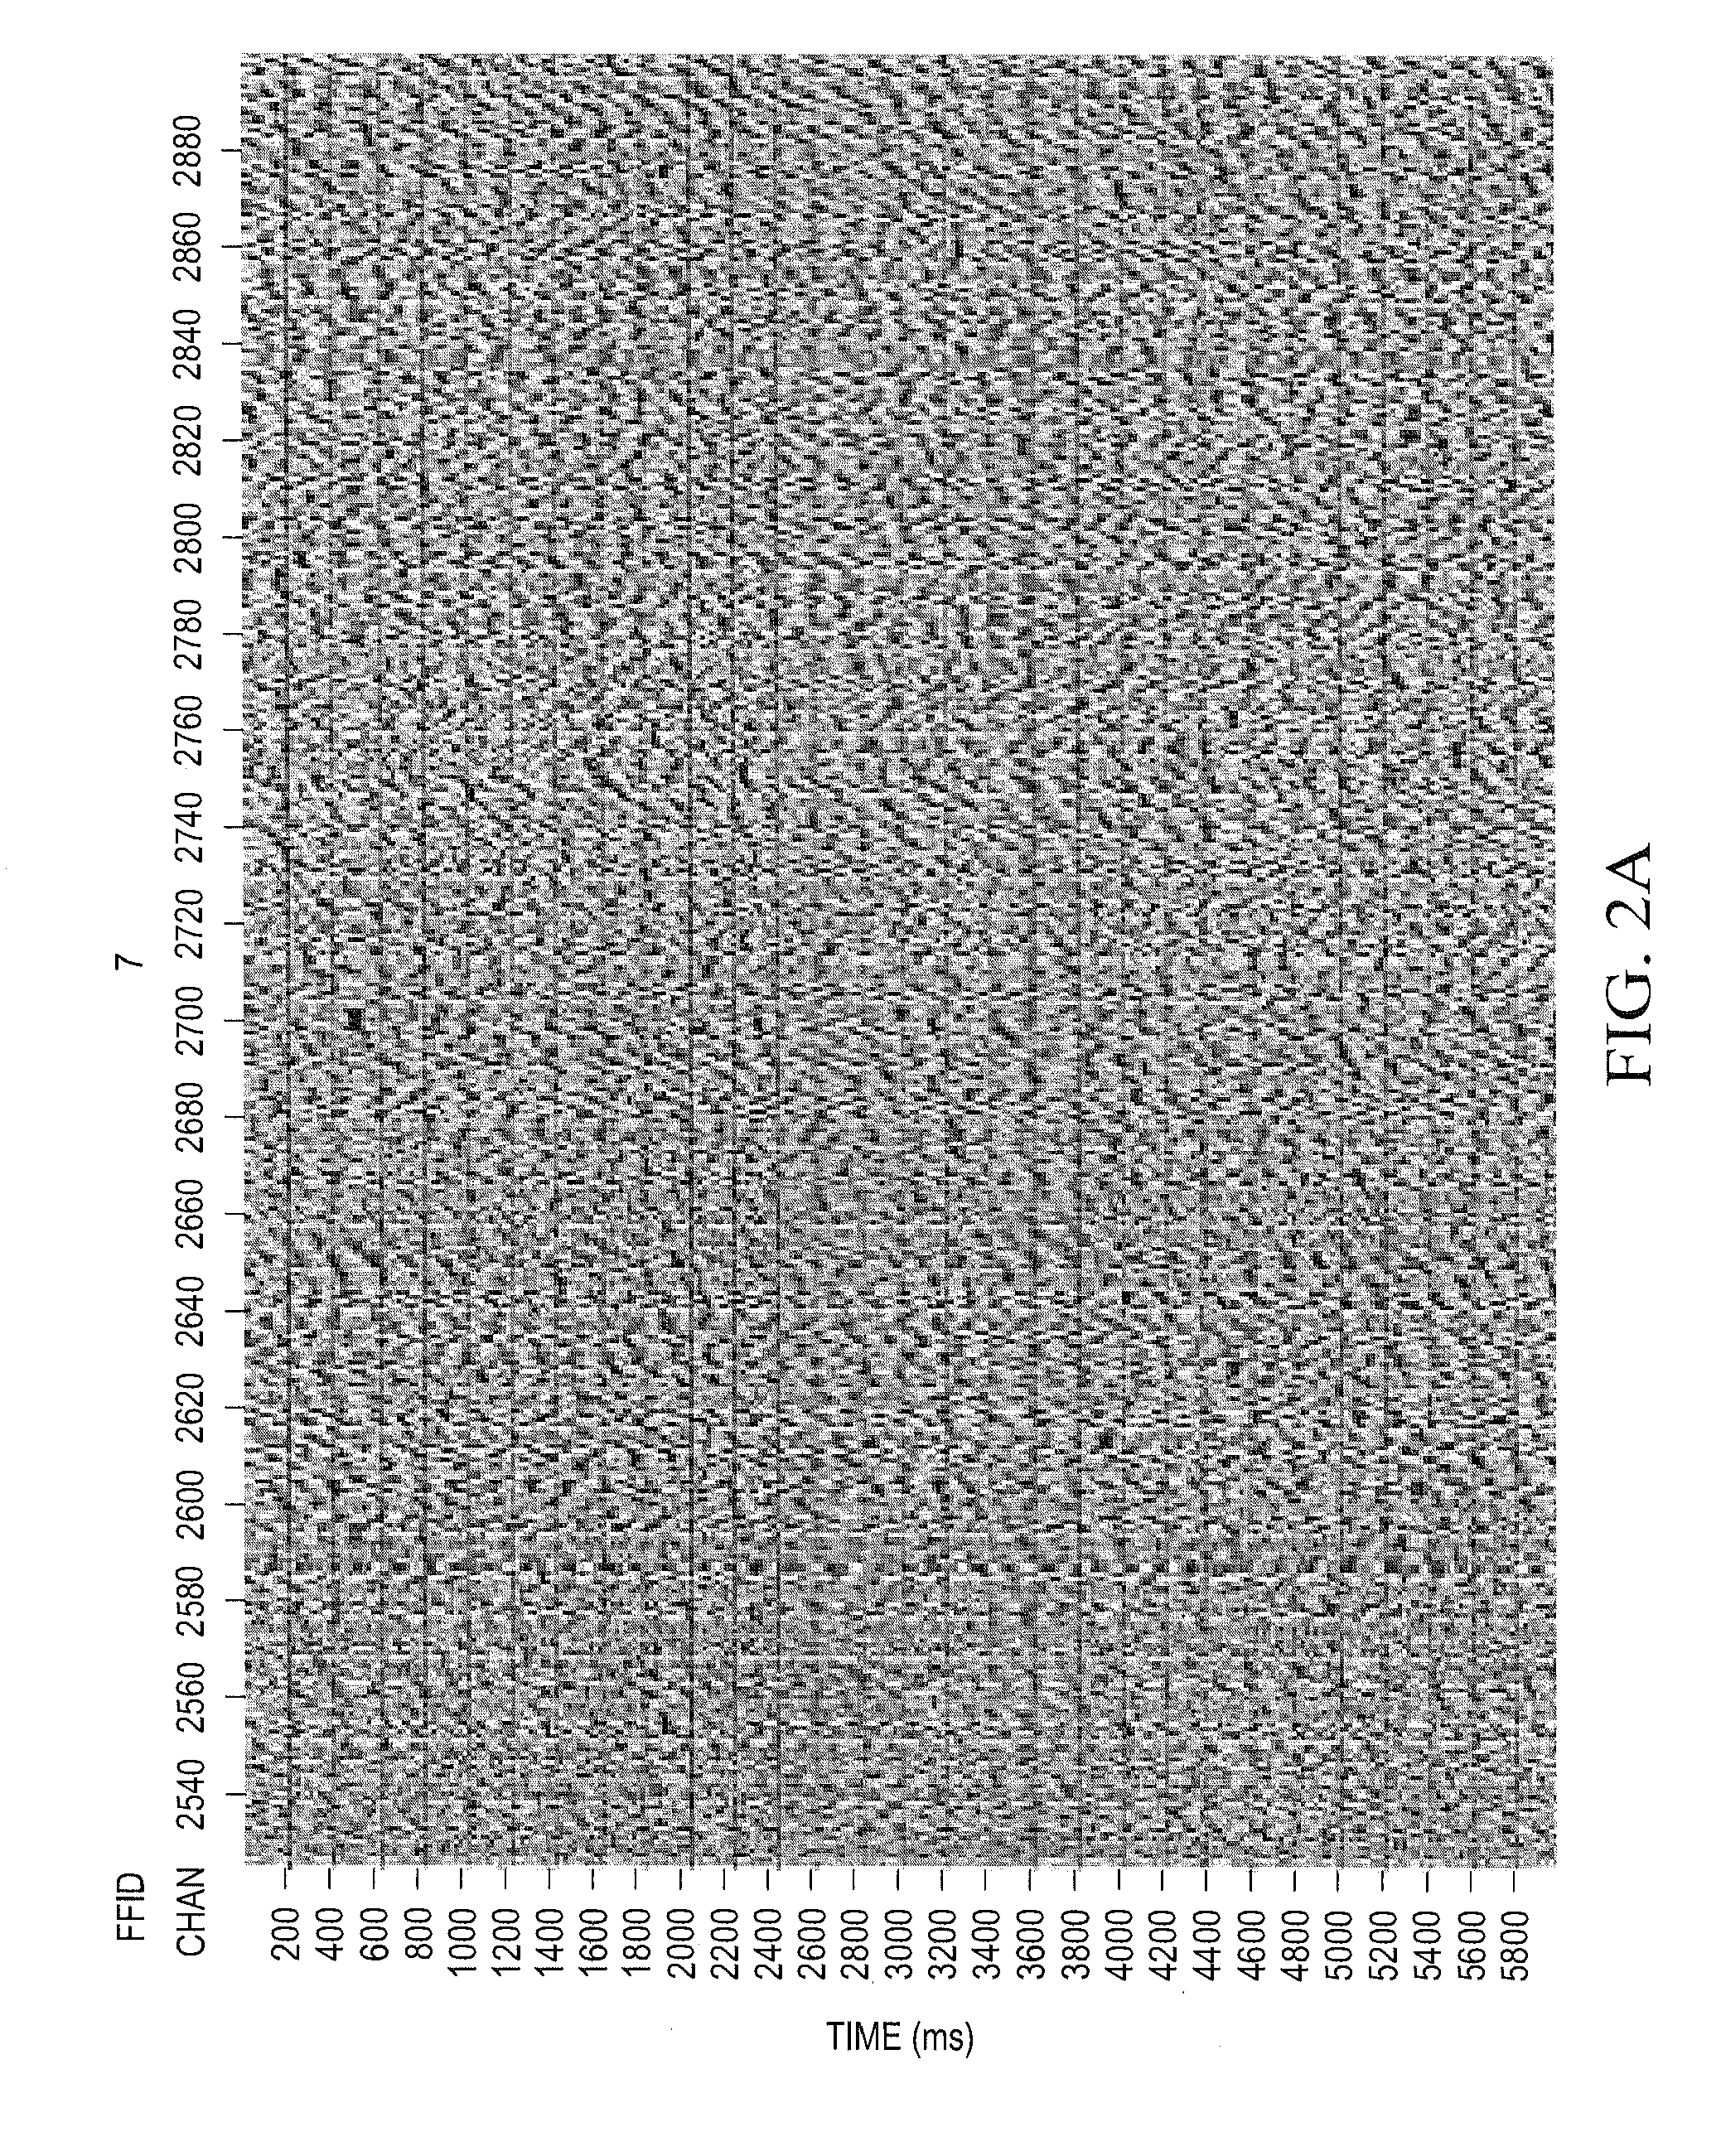 Low frequency passive seismic data acquisition and processing